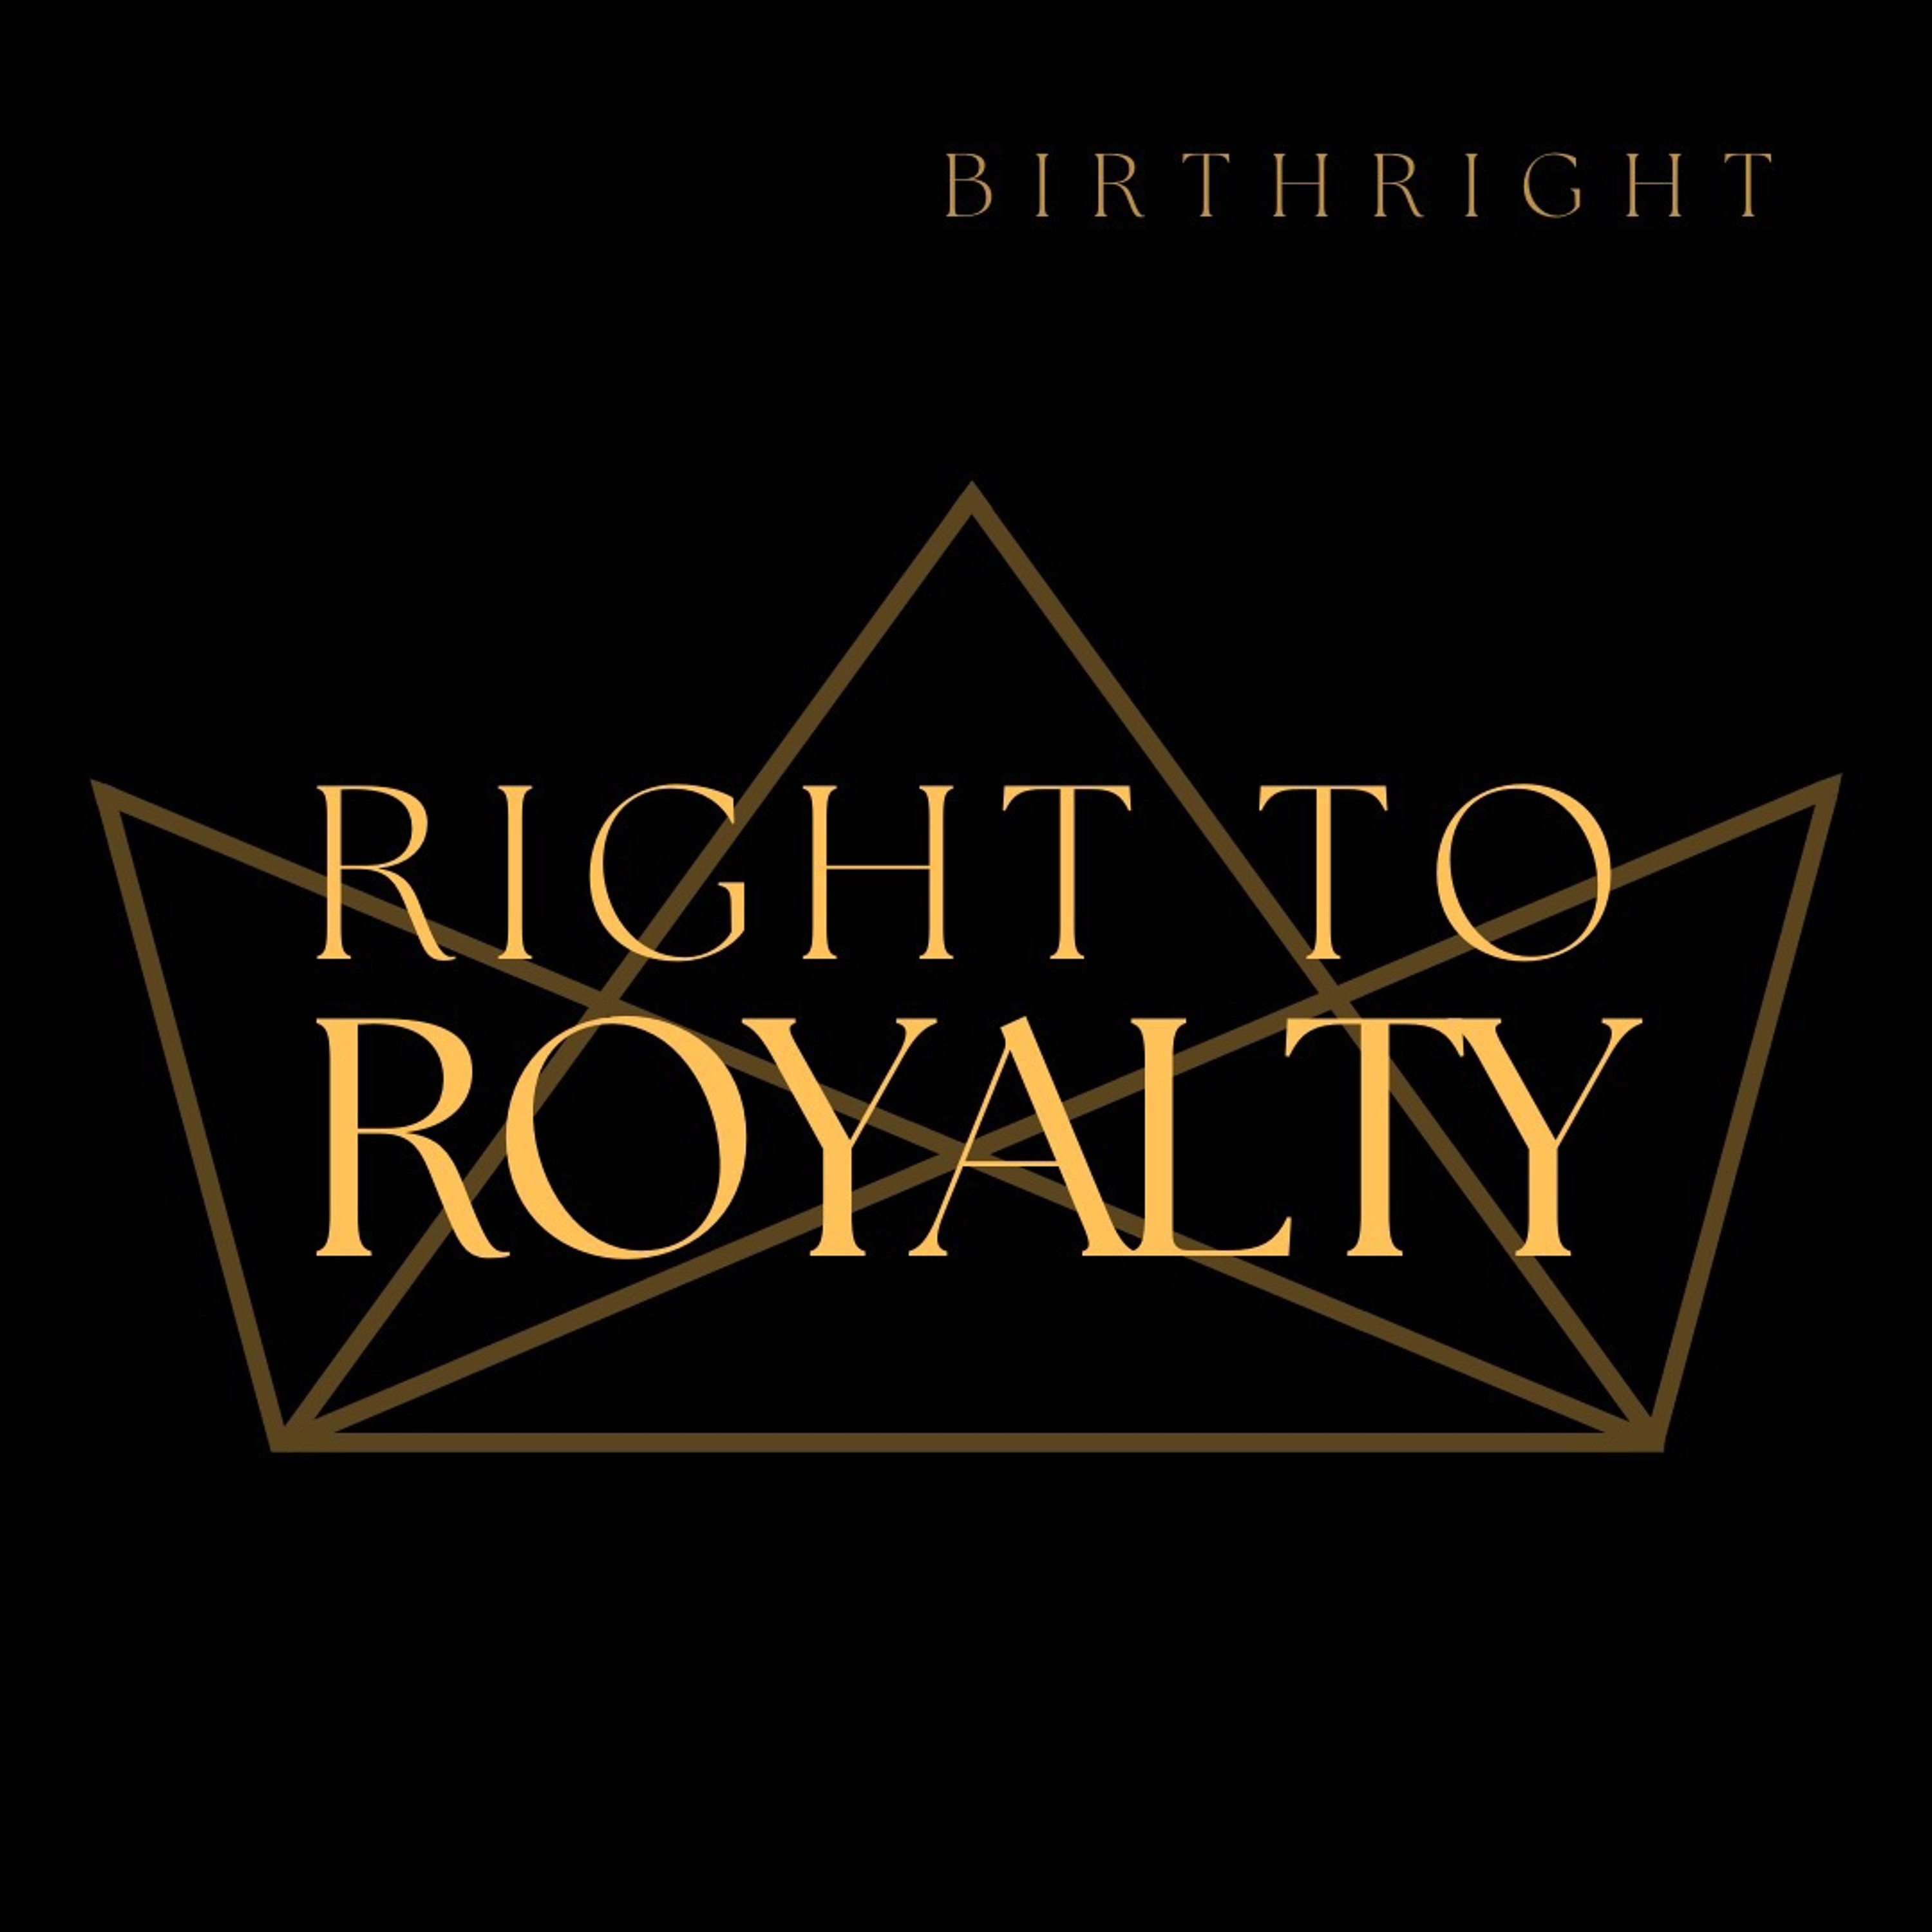 Right To Royalty - Royal Inheritance | Derek Quinby